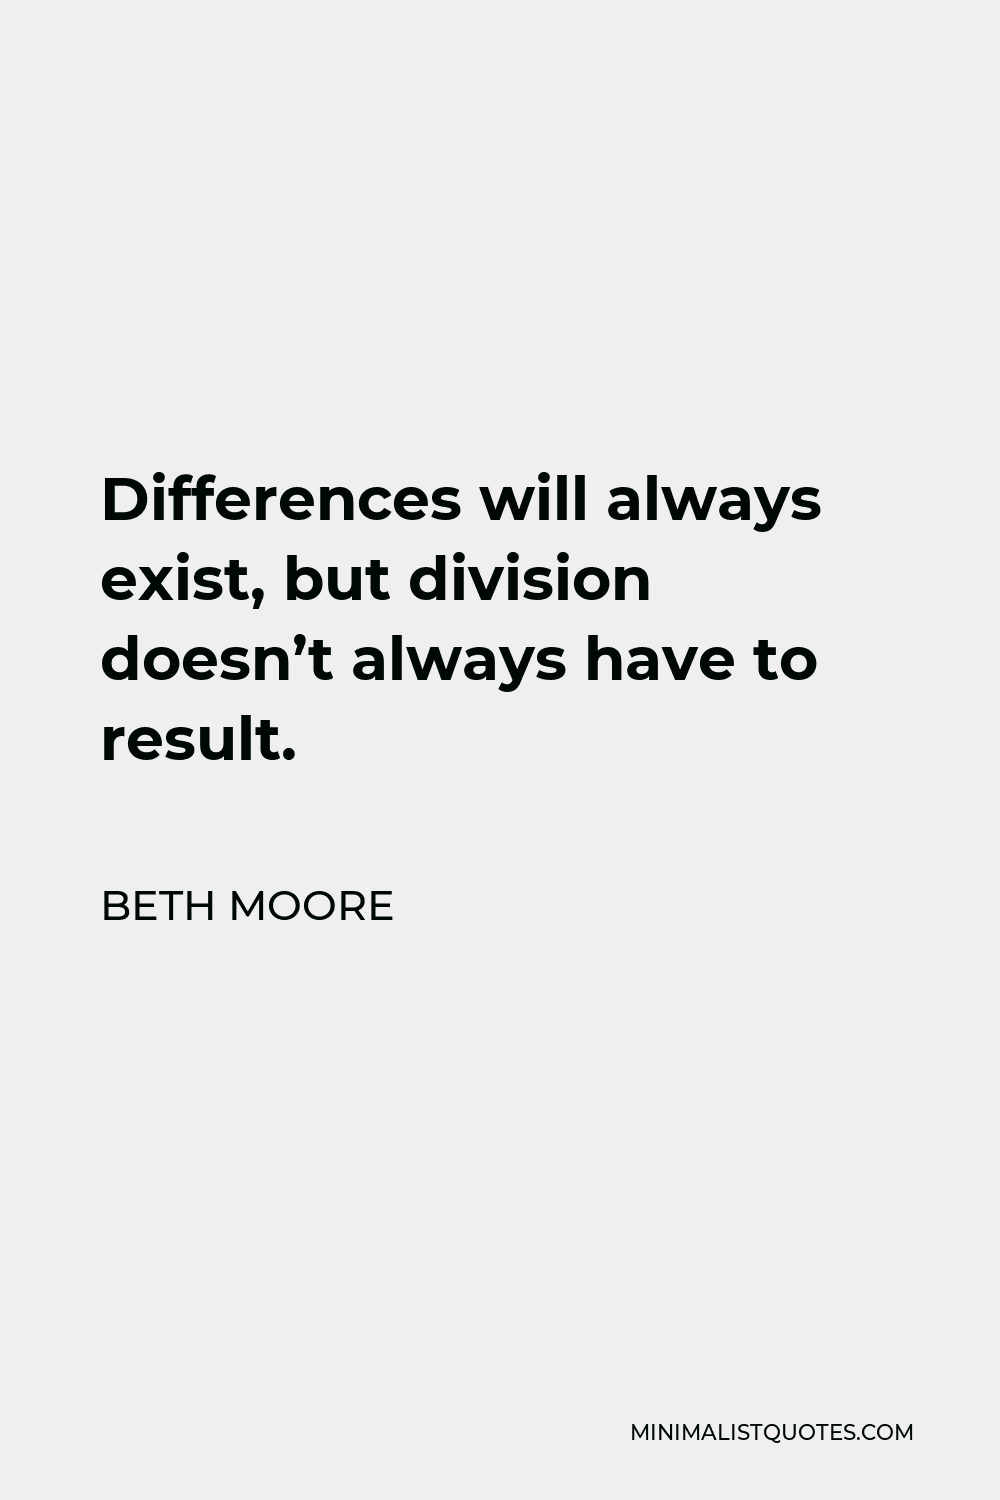 Beth Moore Quote - Differences will always exist, but division doesn’t always have to result.